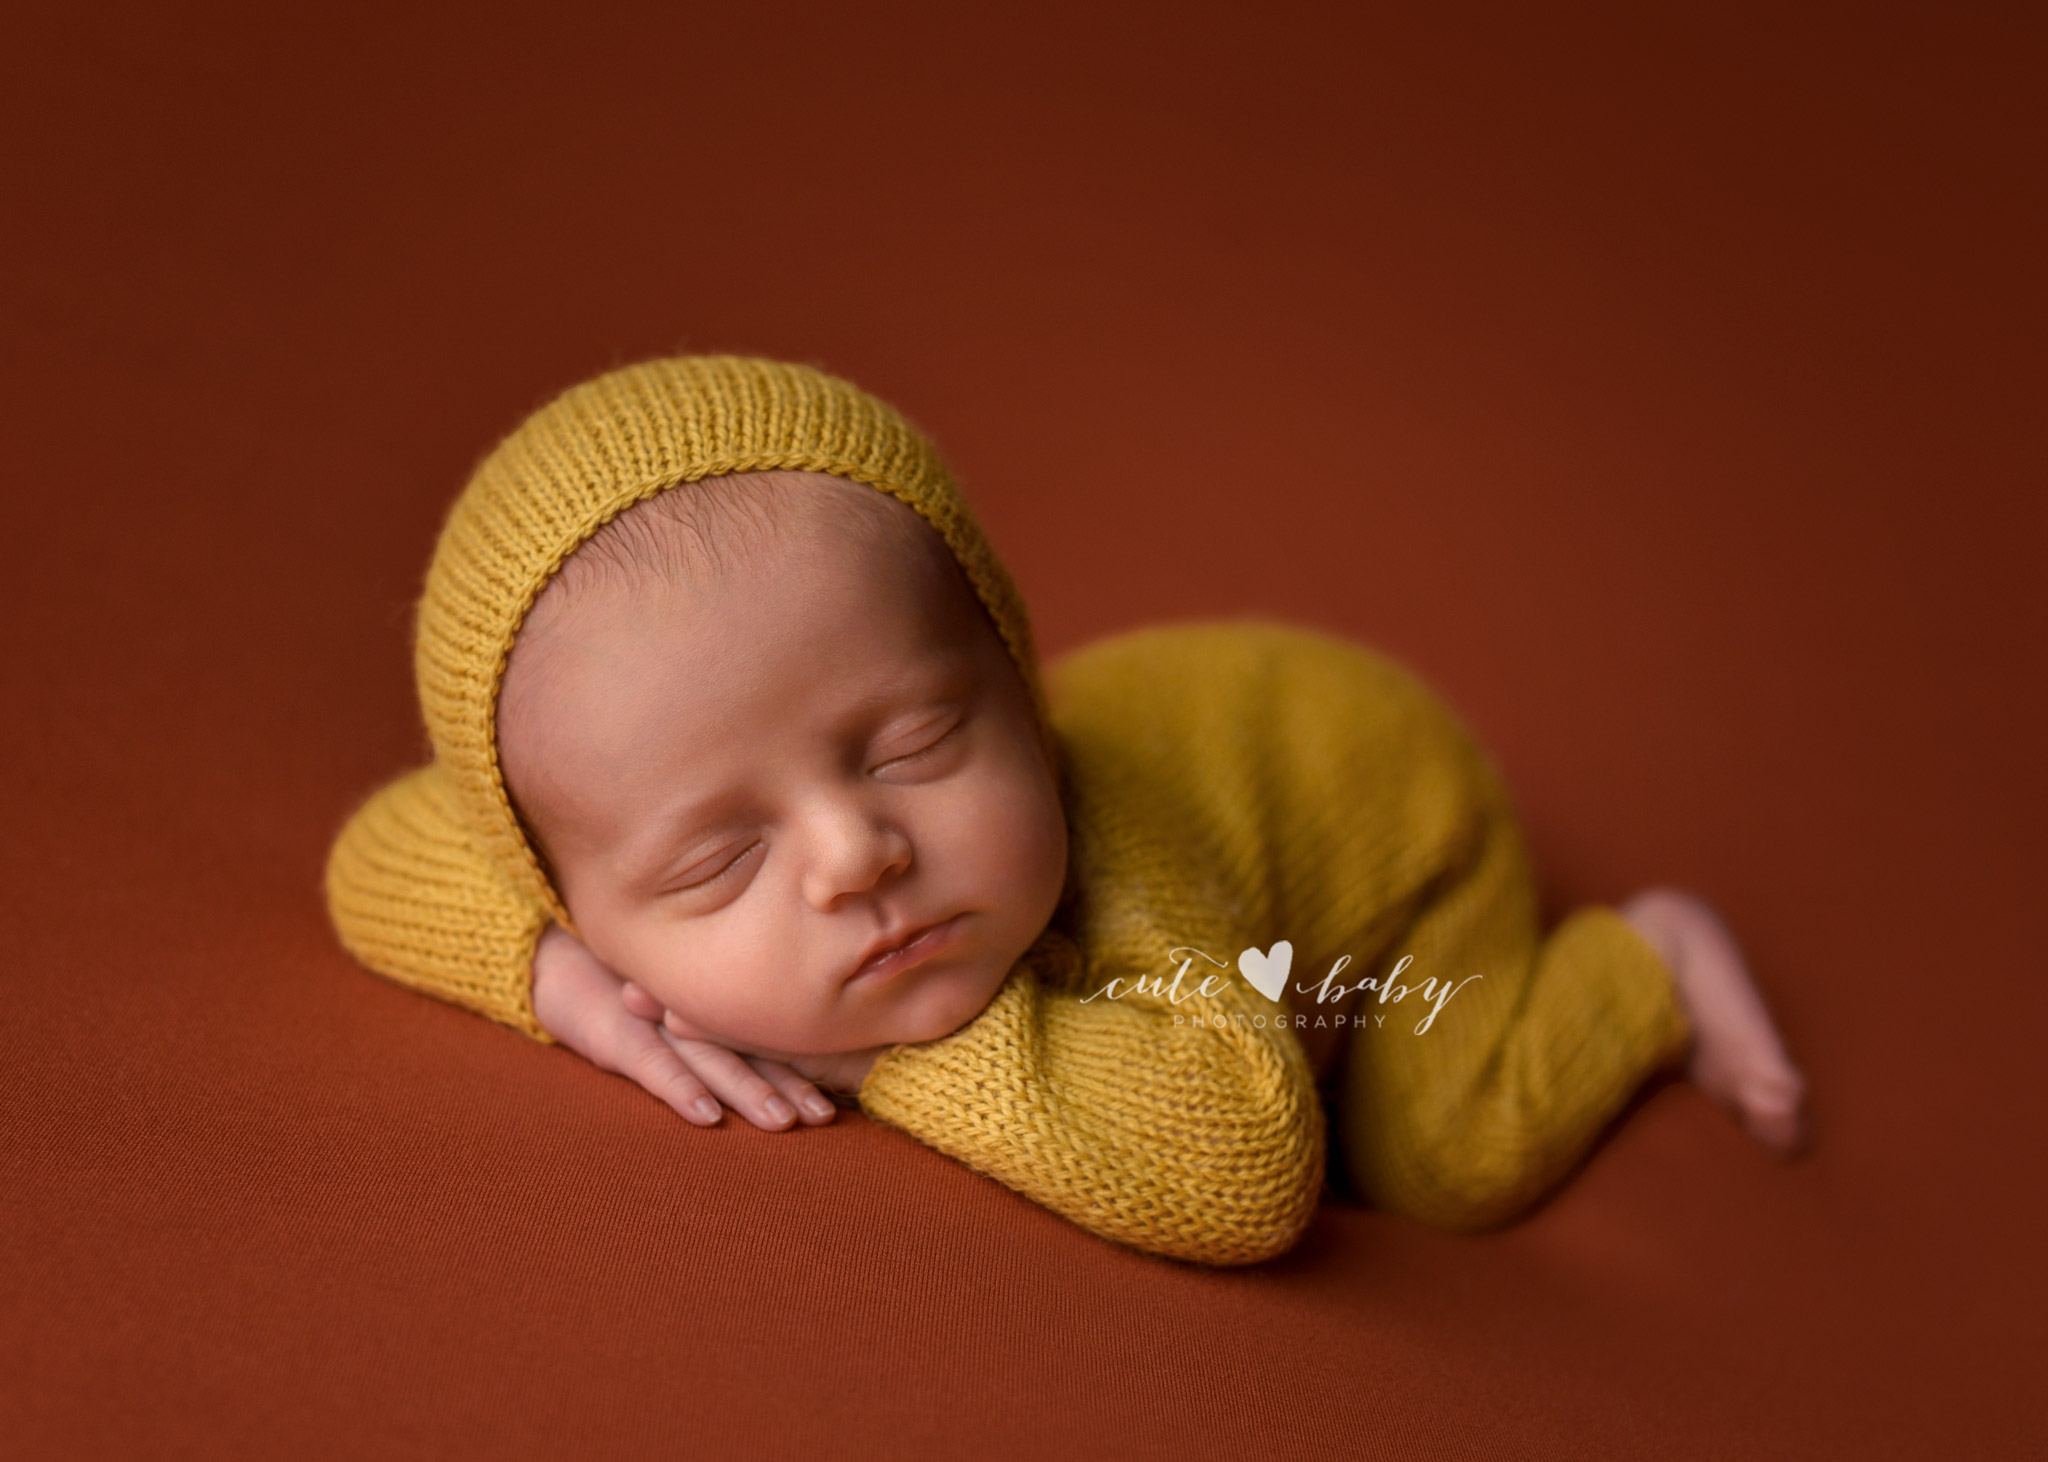 Newborn Photography Manchester by Cute Baby Photography, Studio Newborn photography, Baby Photography, Newborn Session Manchester
